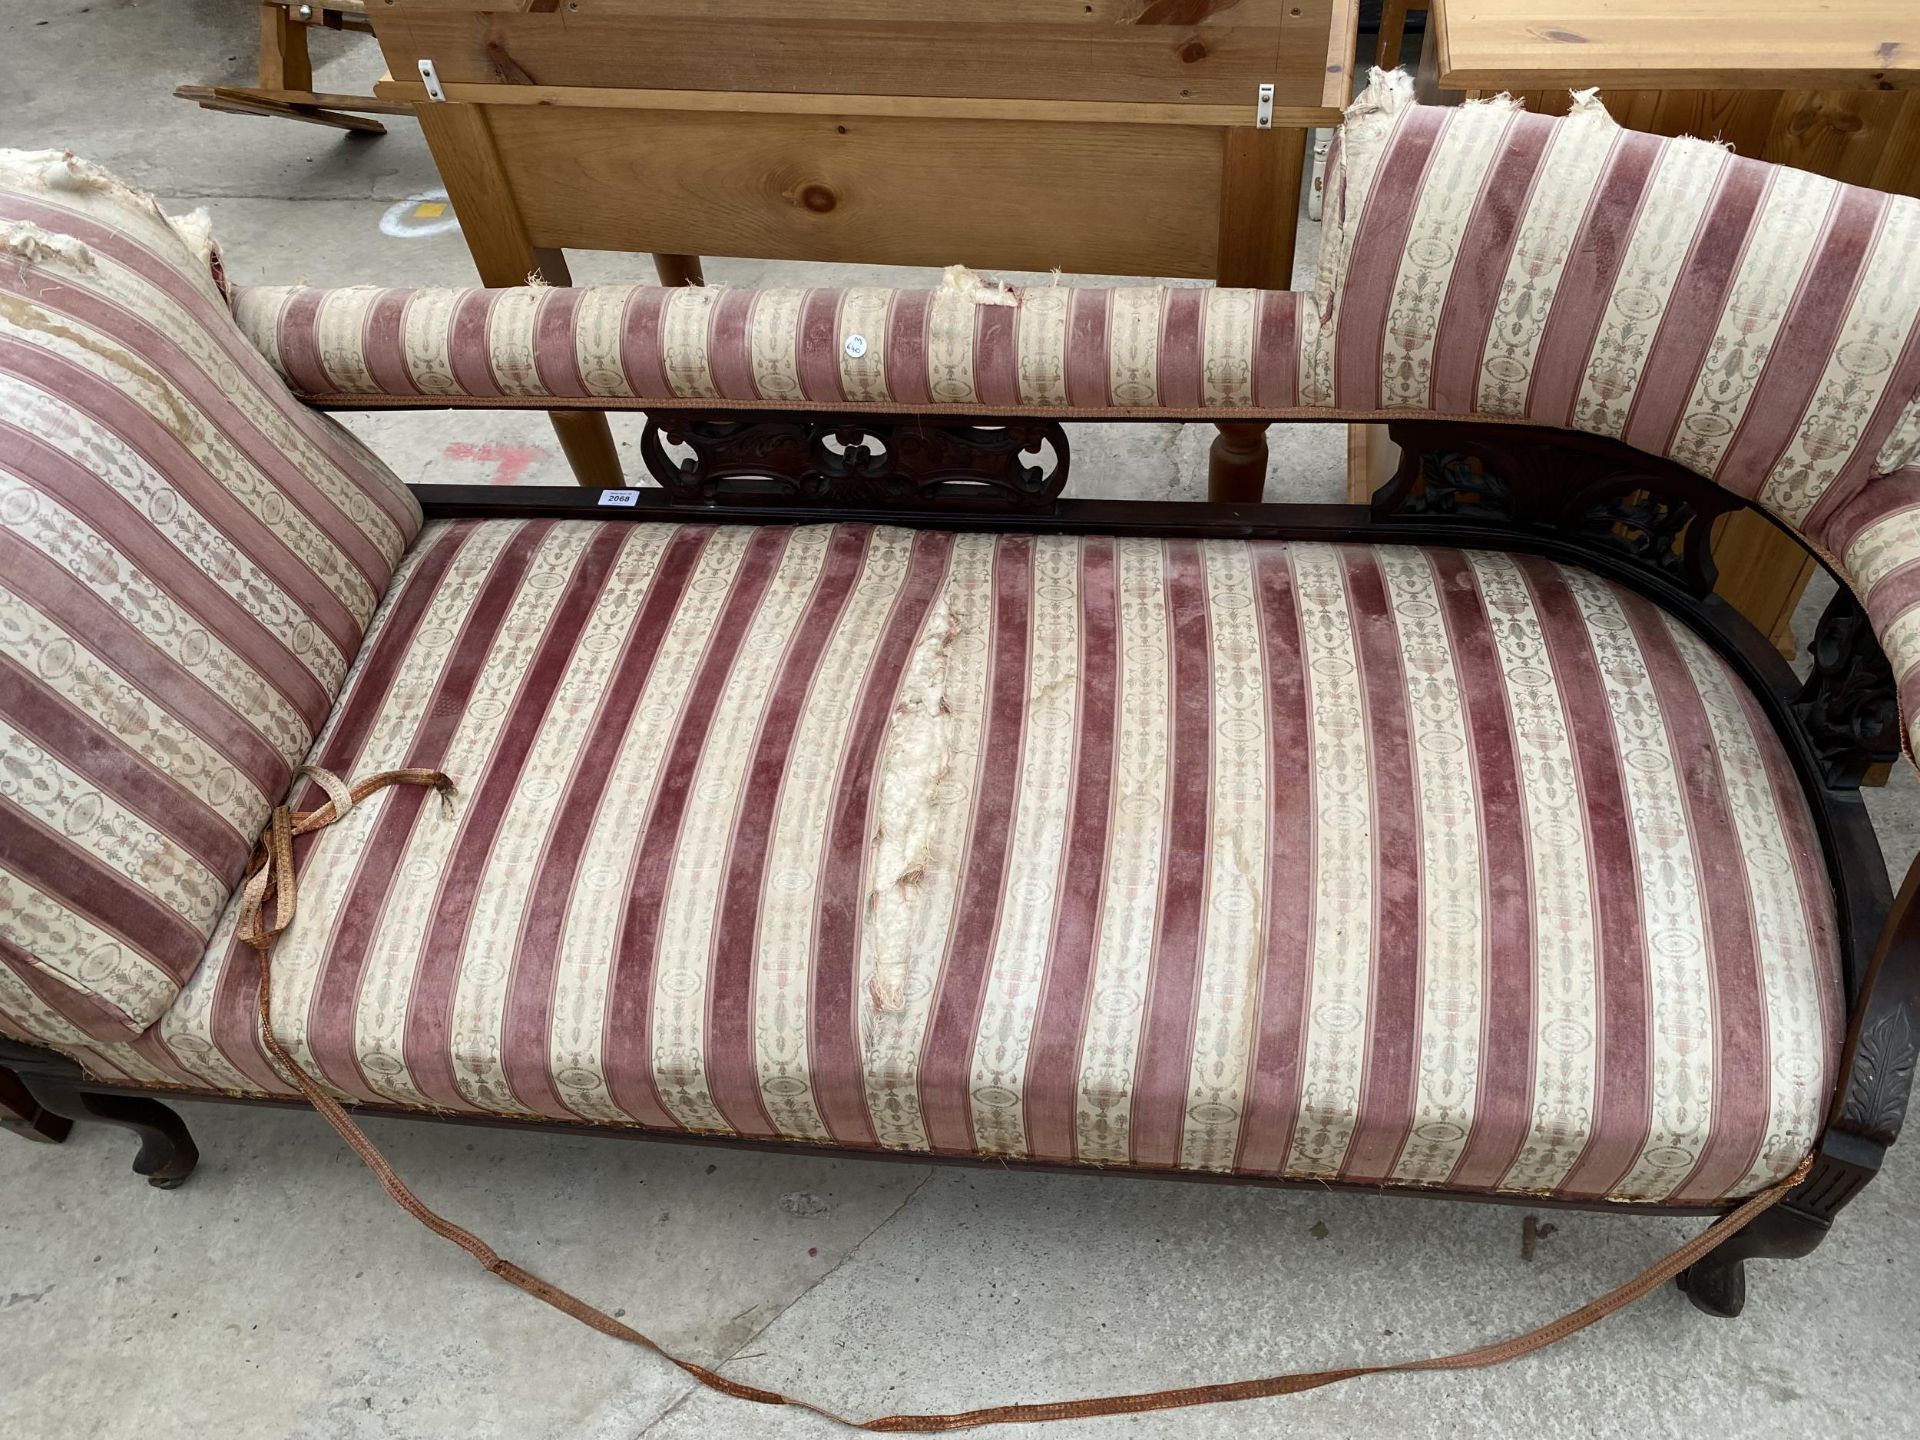 AN EDWARDIAN CHAISE LONGUE - Image 5 of 5